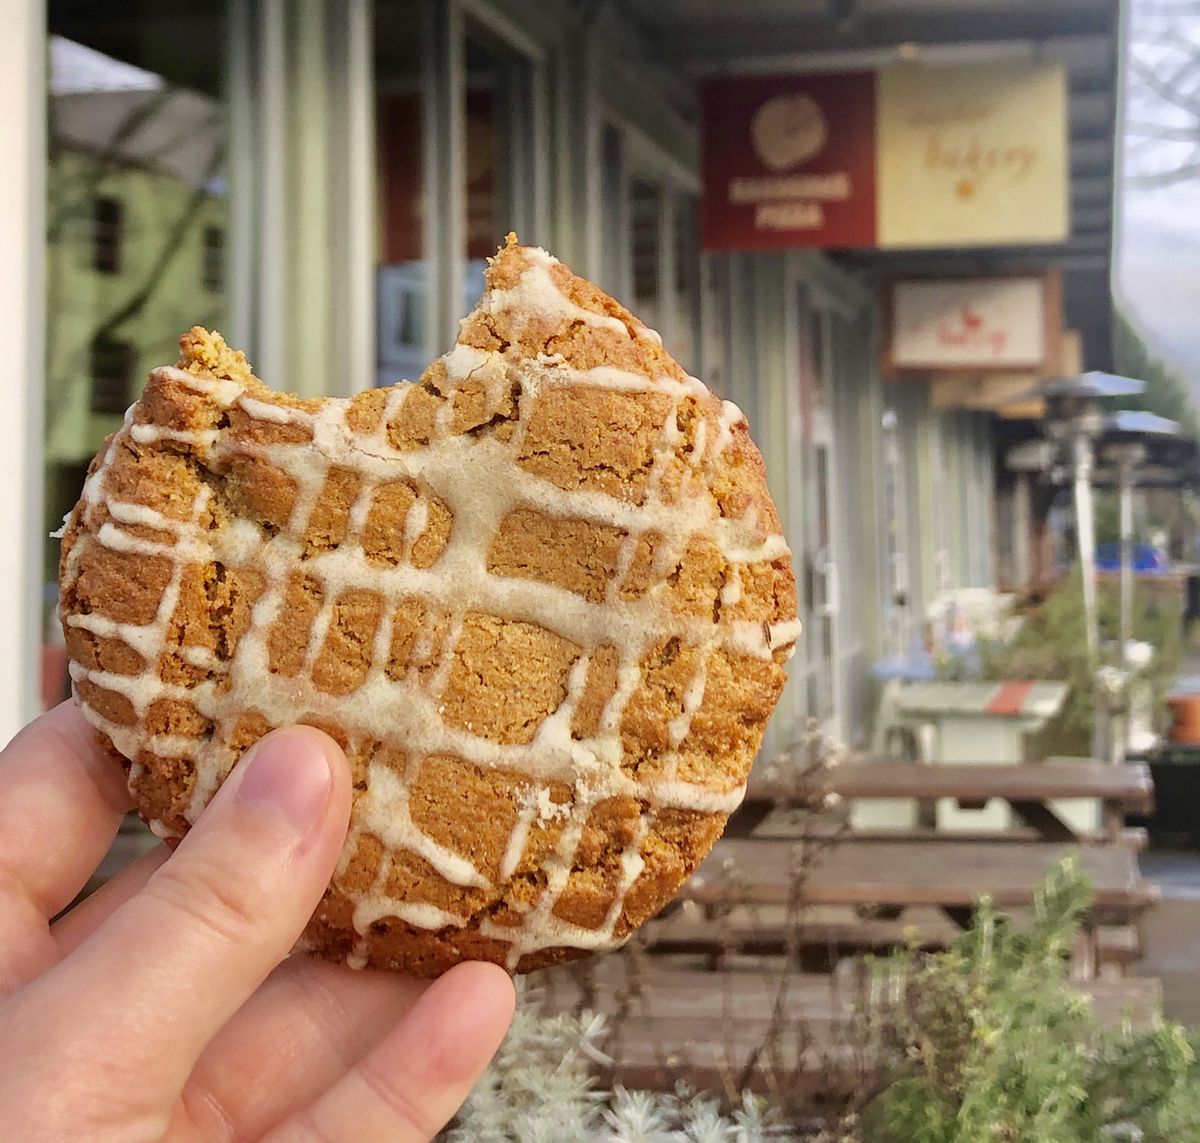 A hand holds up an orange-looking cookie with a lattice of royal icing, with one bite taken out of the top. It’s held up in front of the sign for Seastar Bakery